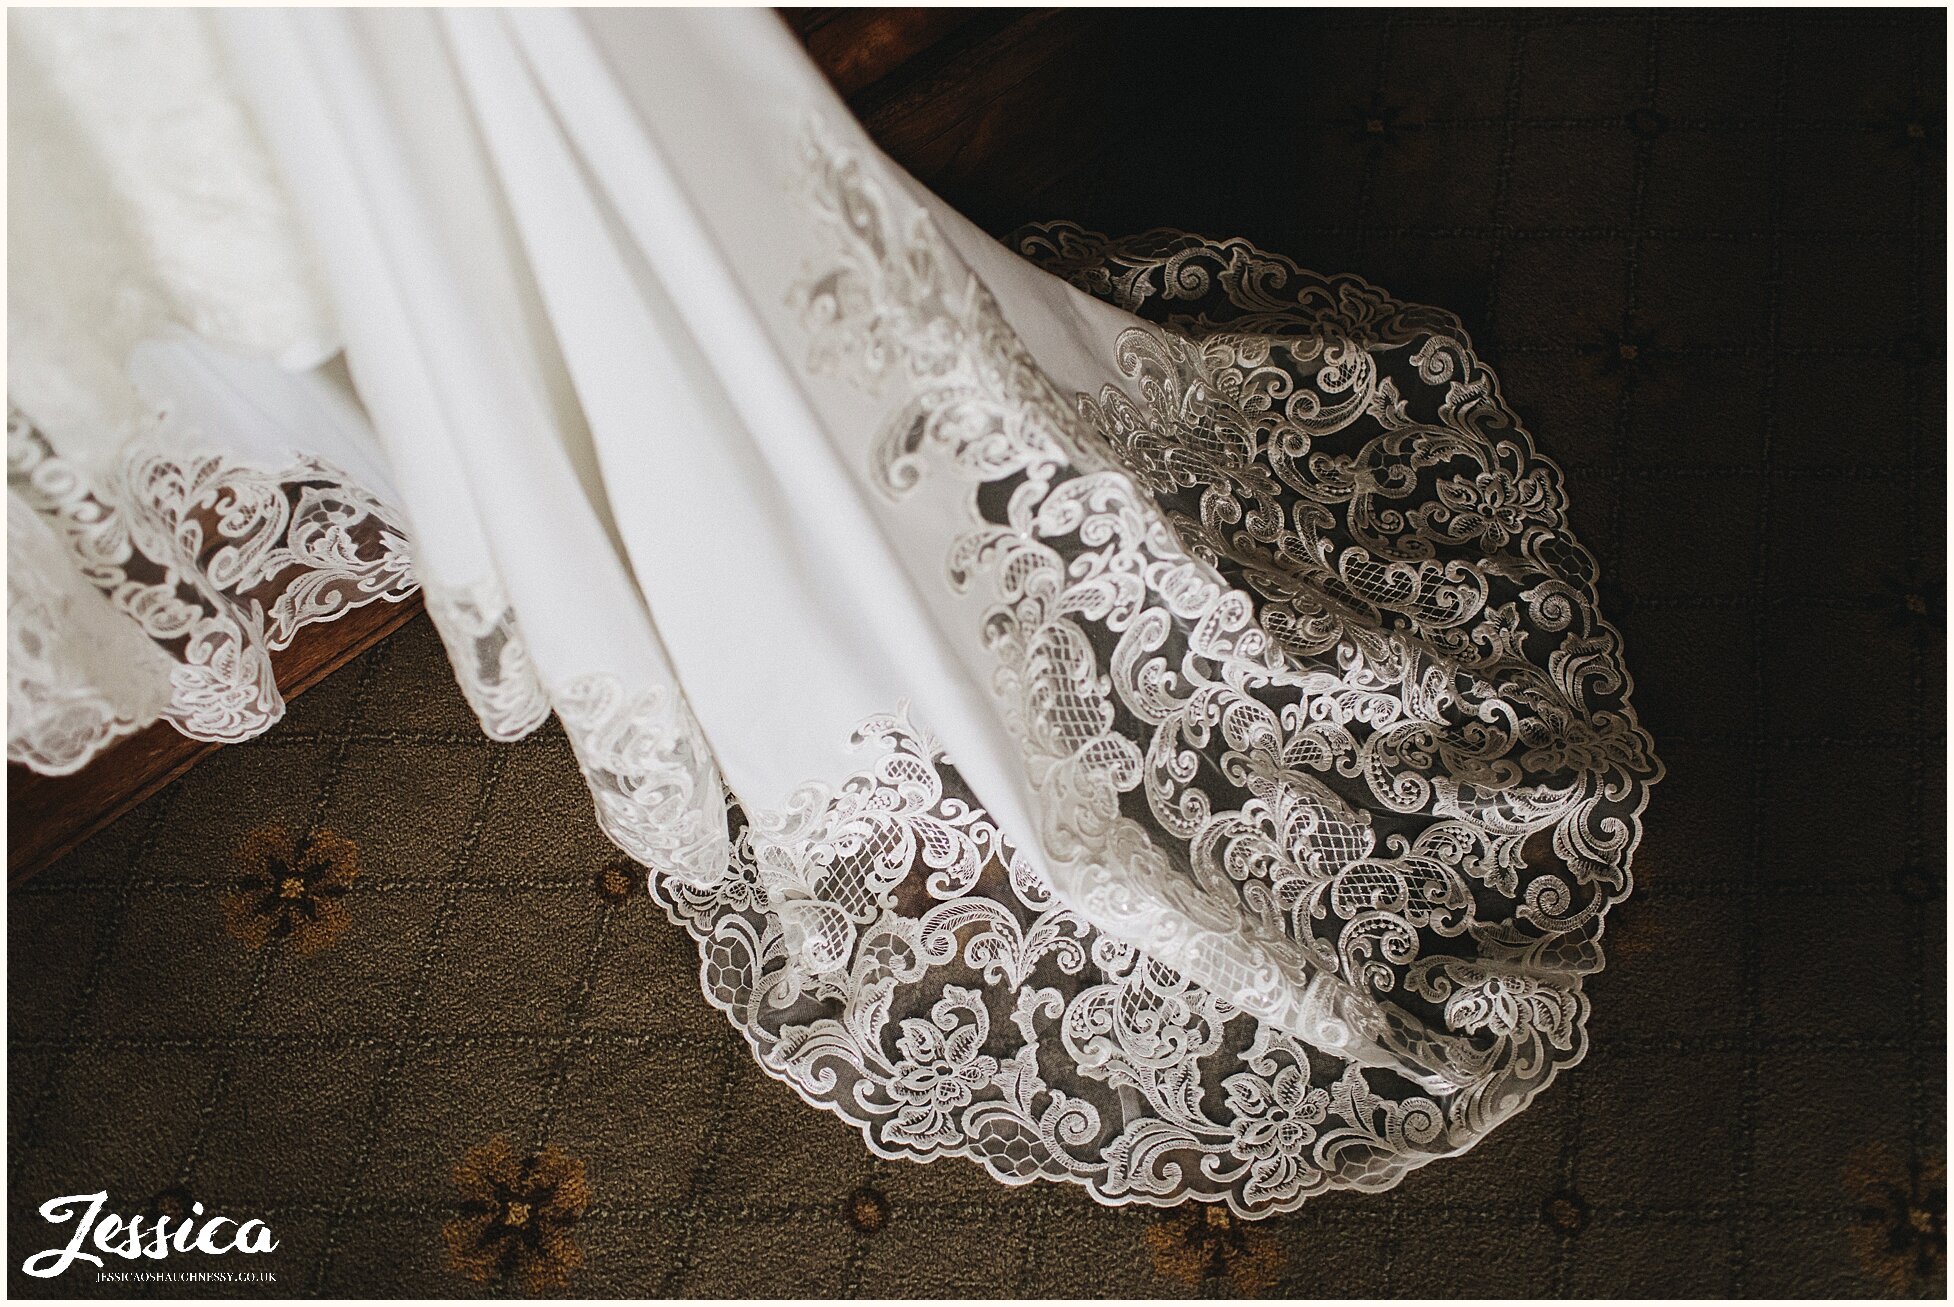 the lace train of the wedding dress